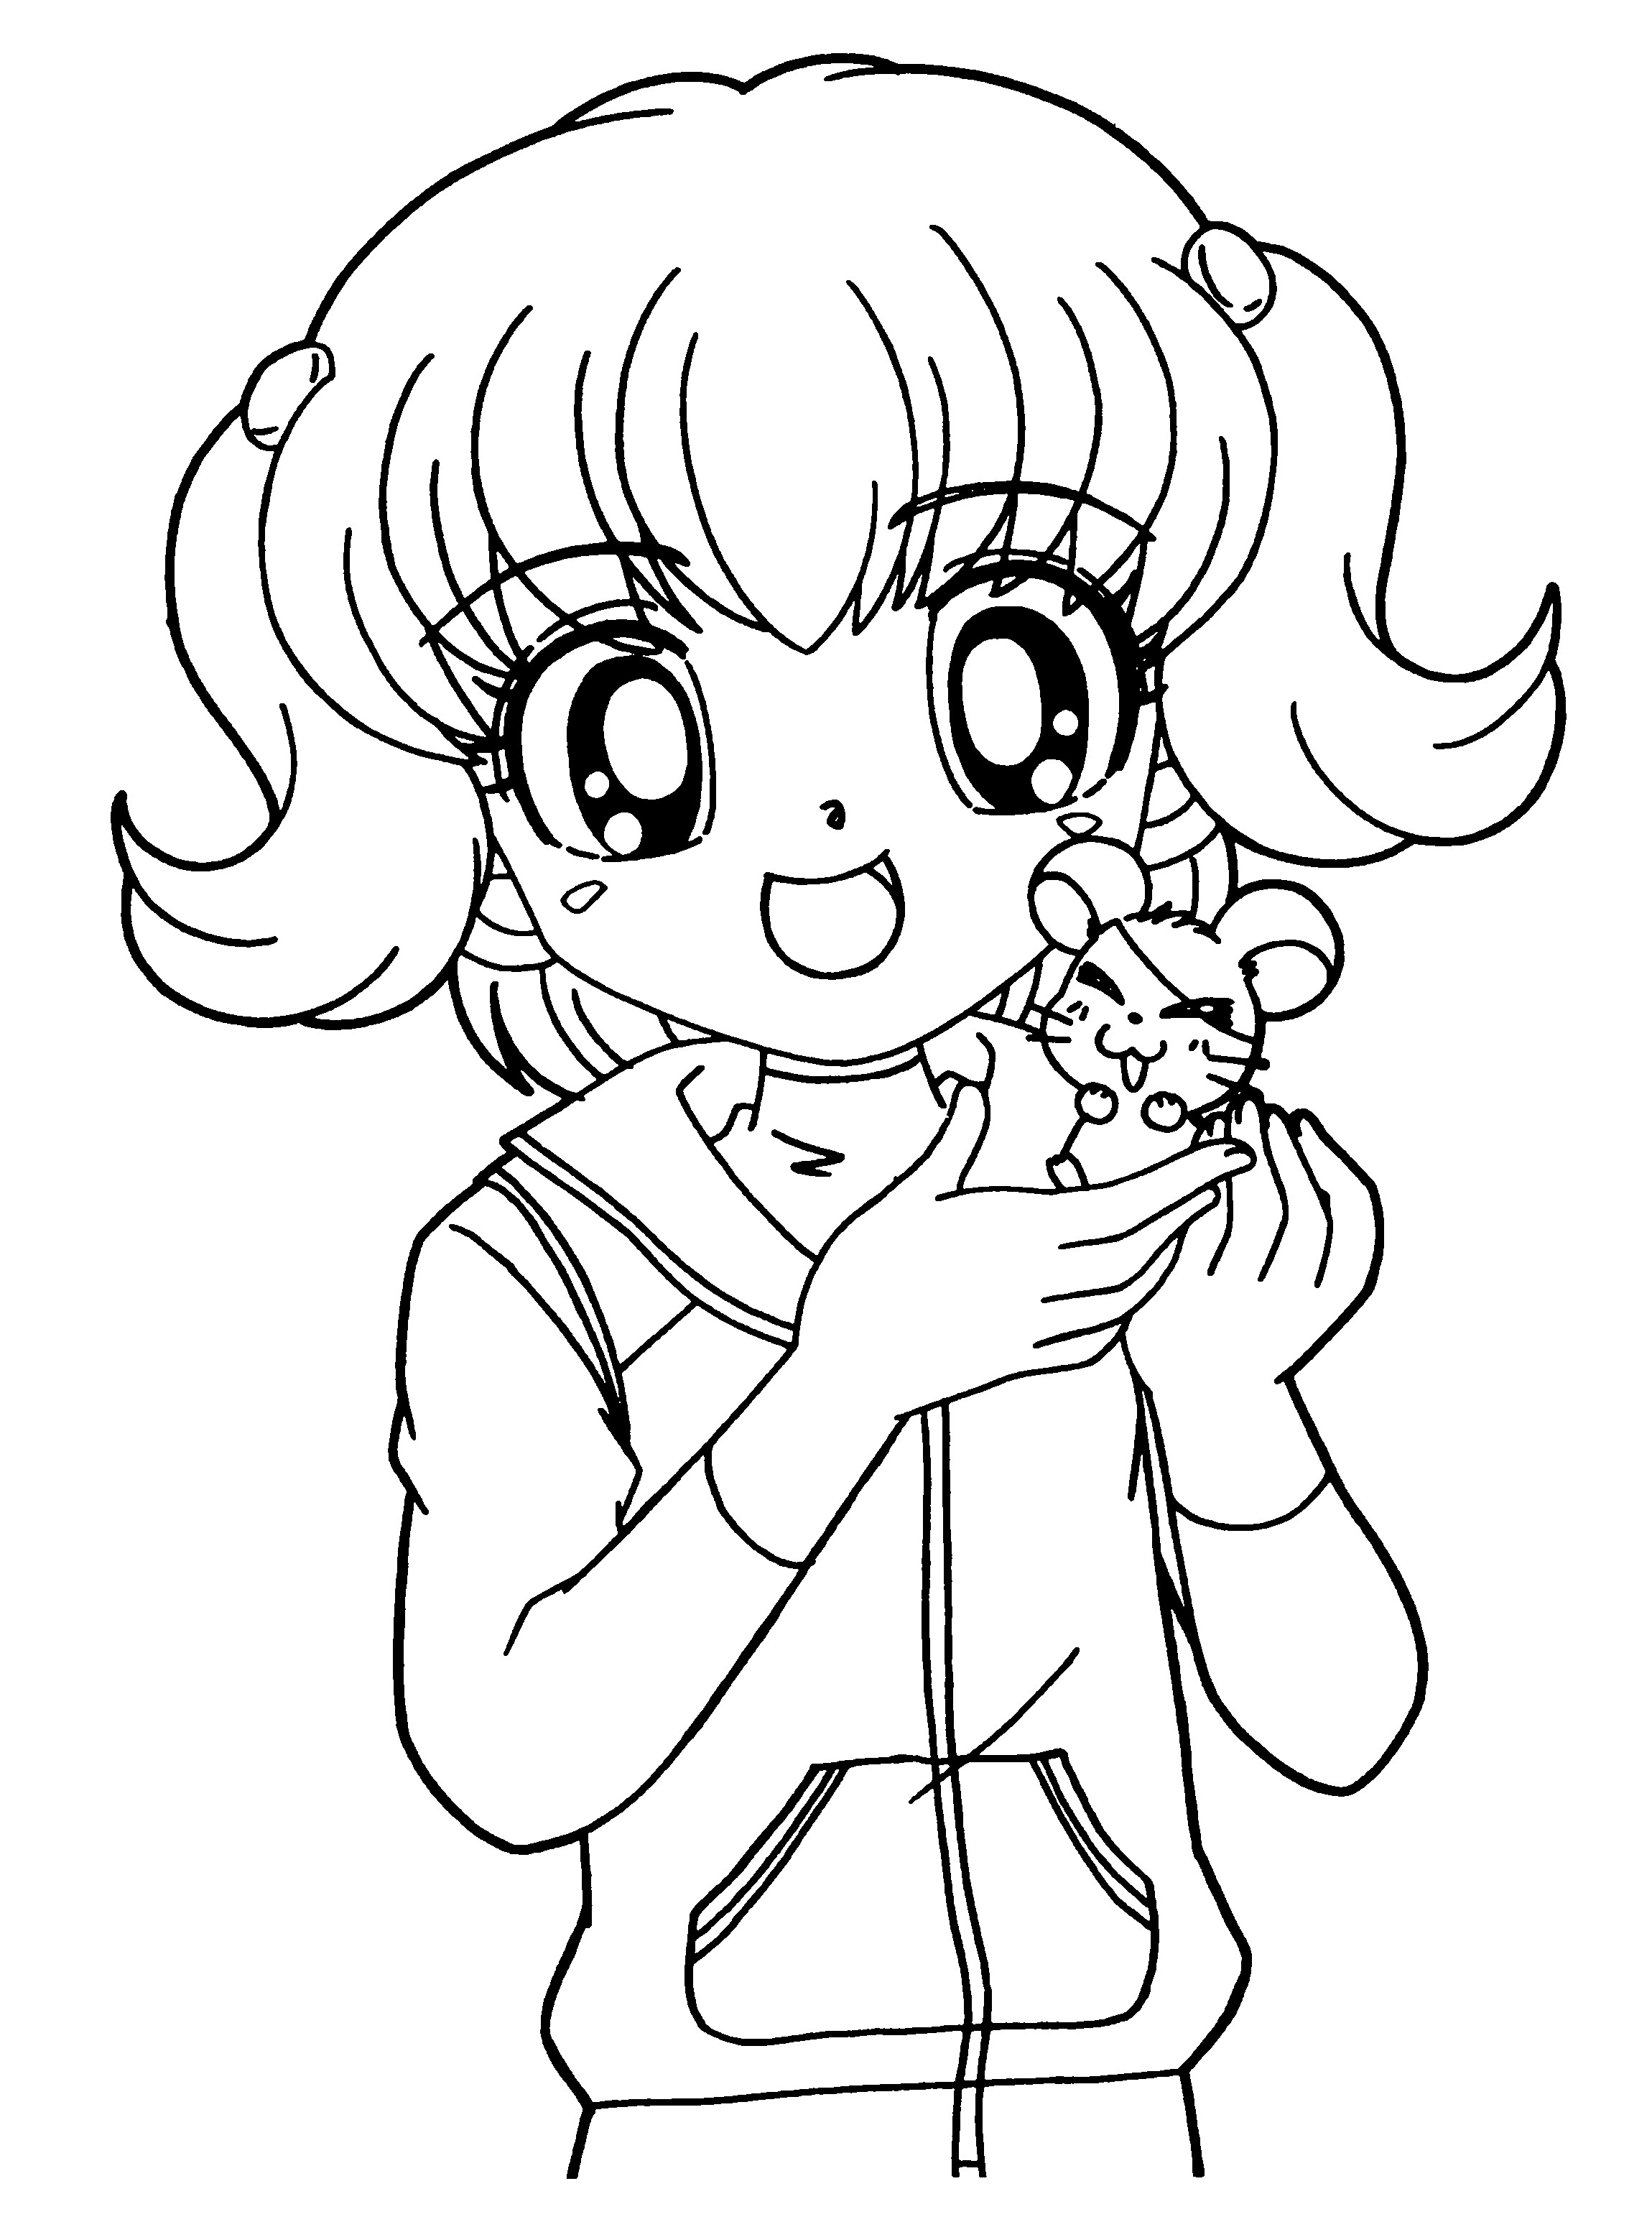 Coloring Sheets For Girls Free Printable
 Anime Coloring Pages Best Coloring Pages For Kids